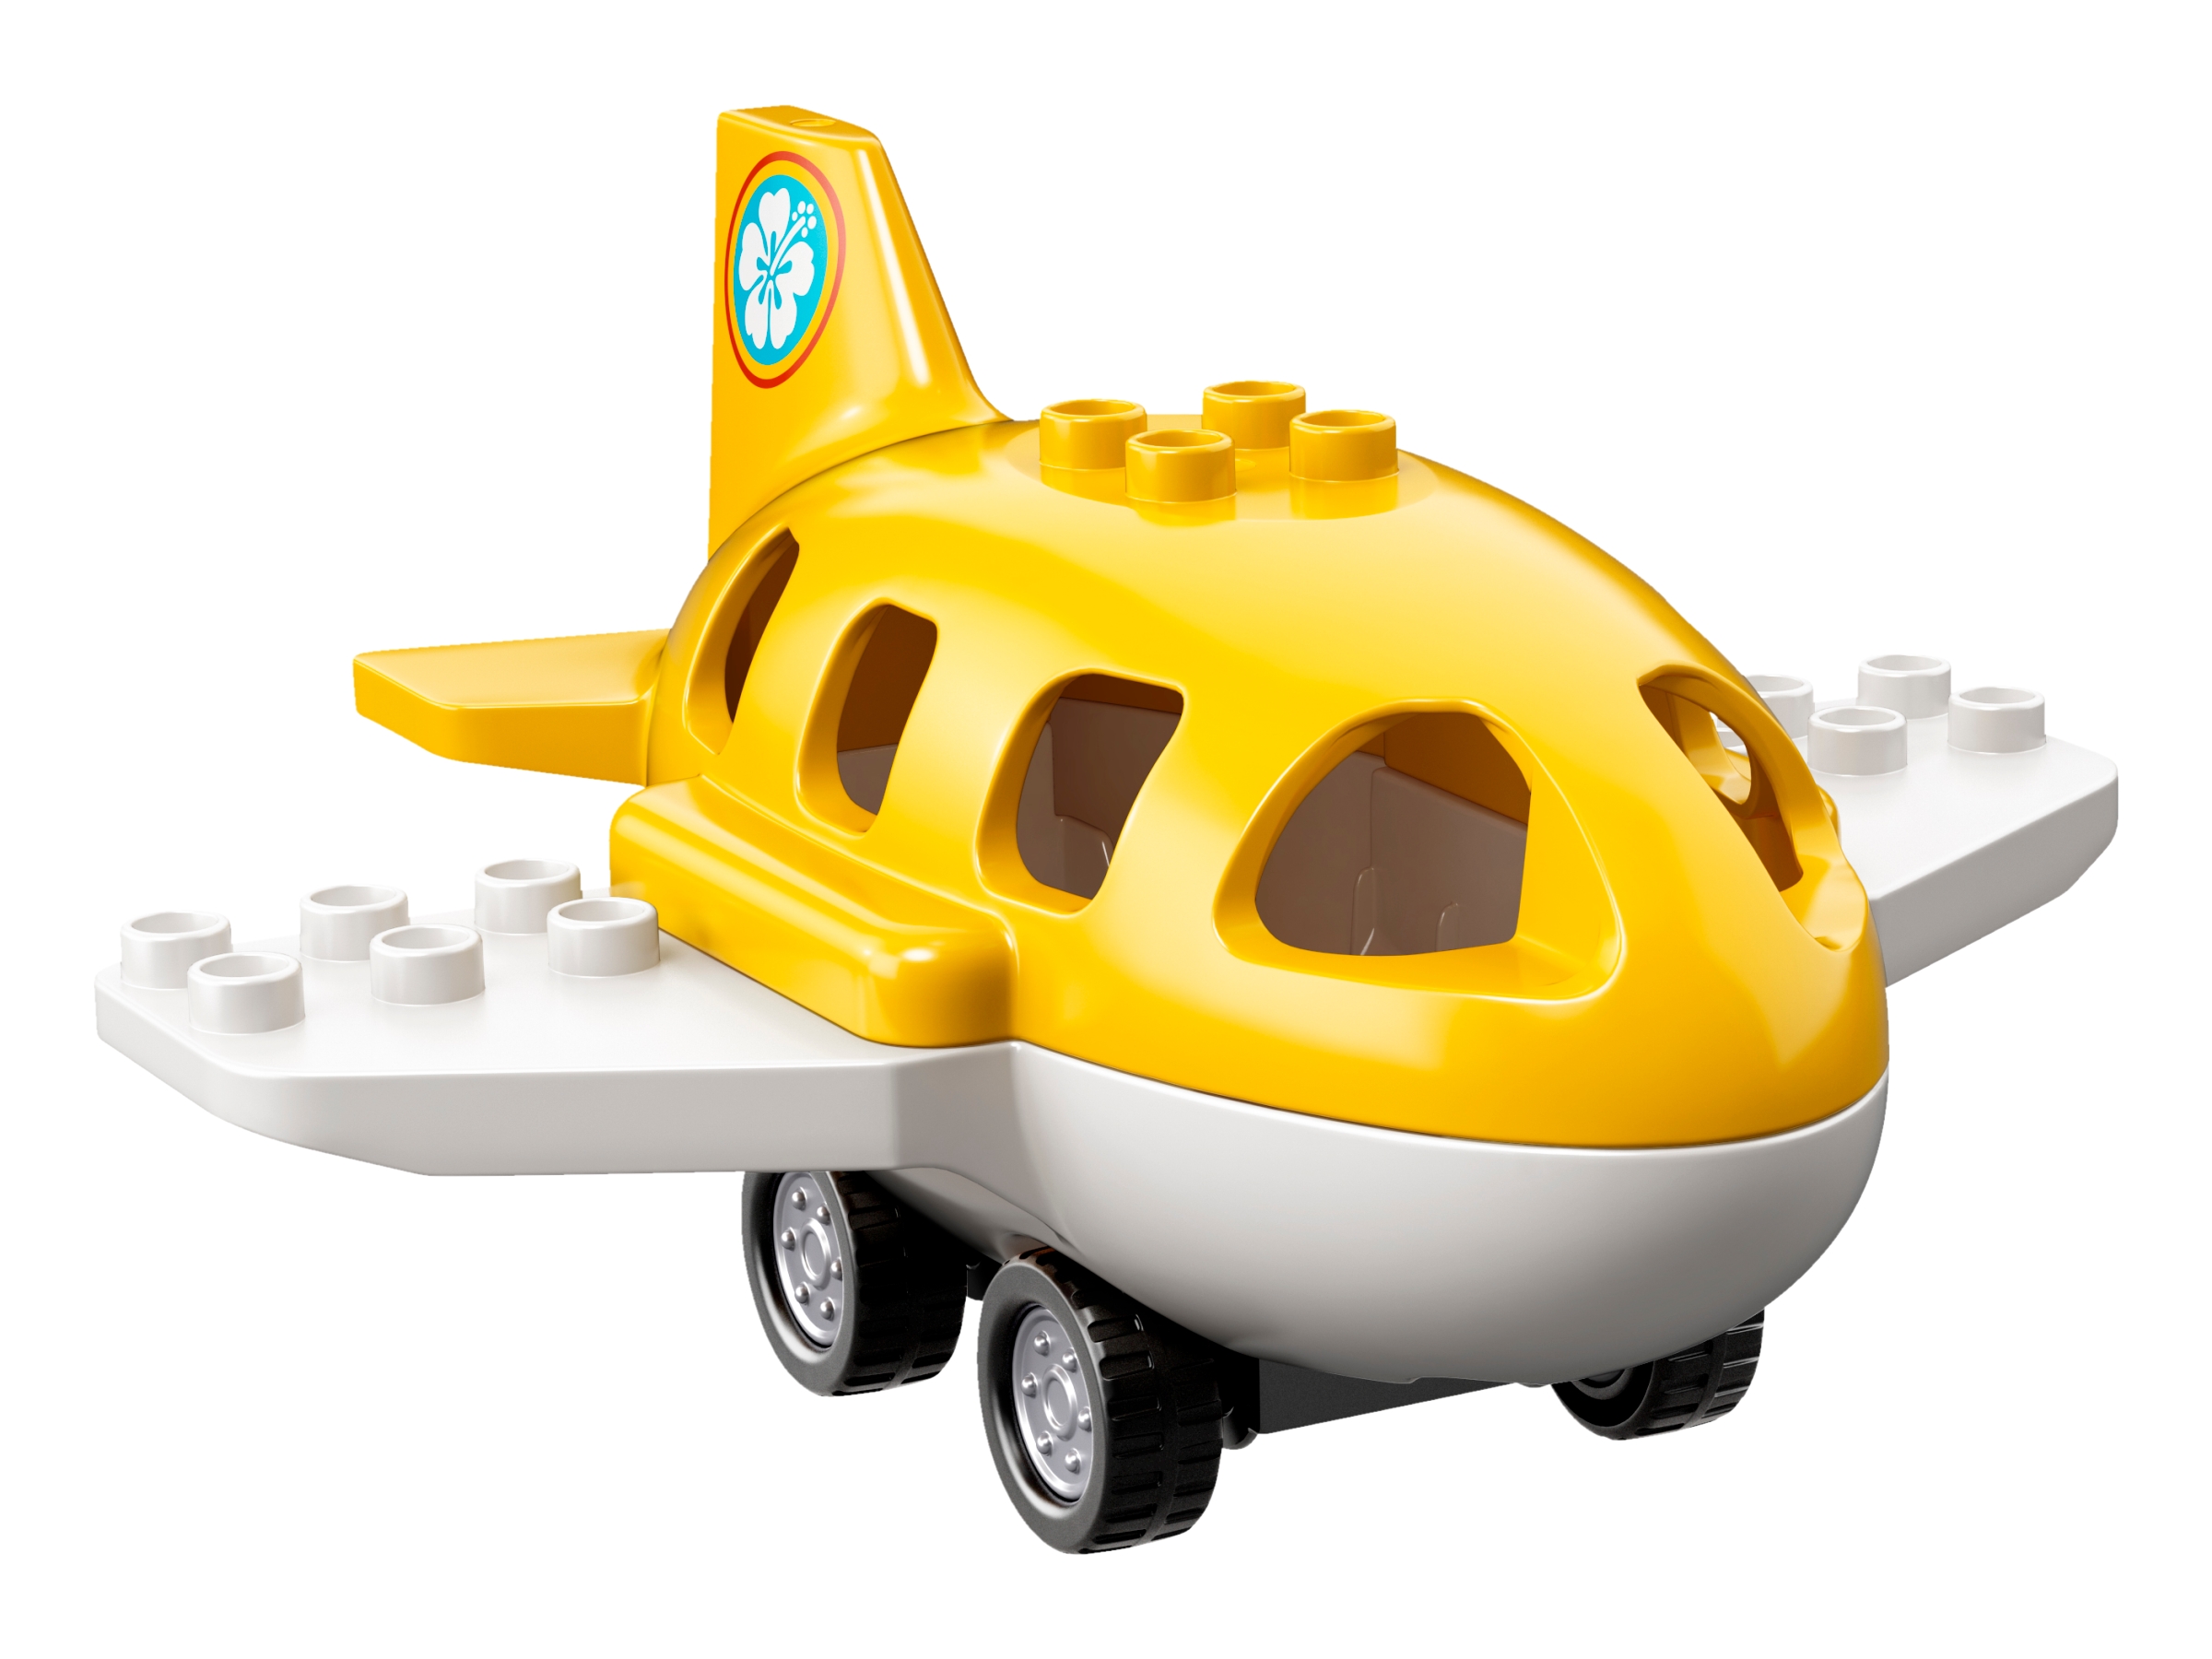 Lego Duplo MIDSIZE YELLOW AIRPLANE for AIRPORT Complete with Wheels Passenger 